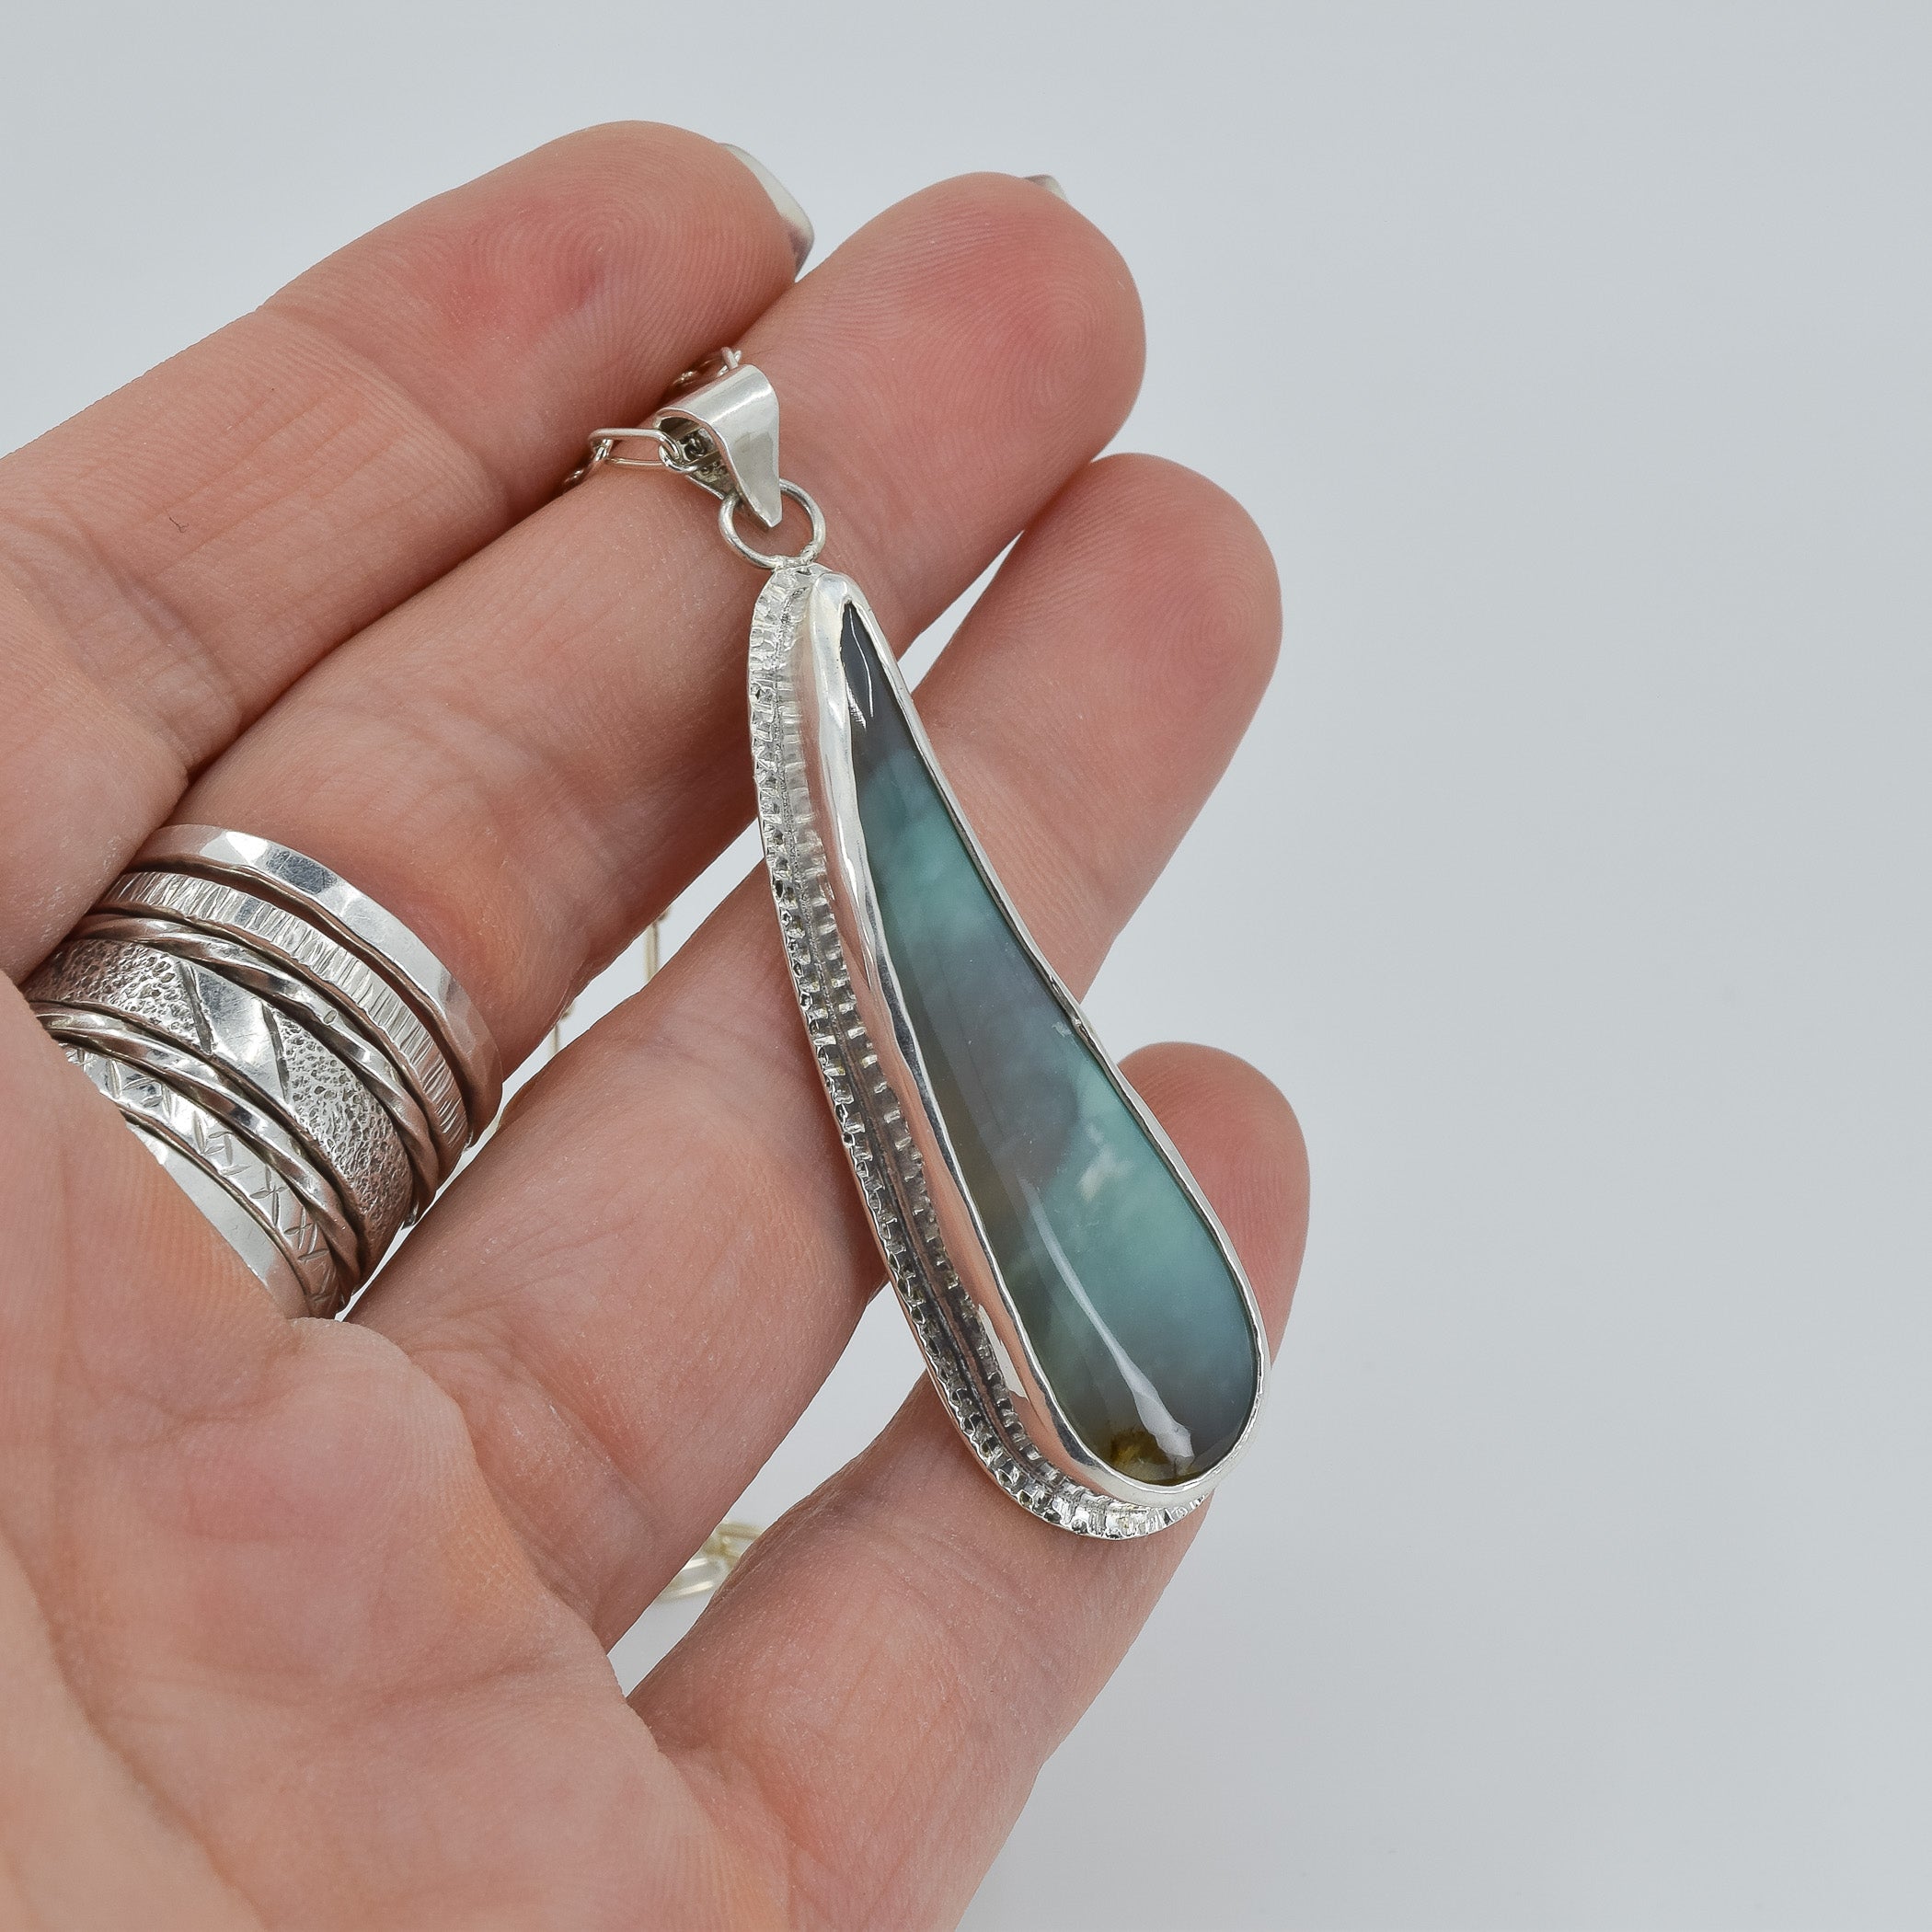 Blue opalized wood pendant necklace in sterling silver shown in hand for scale